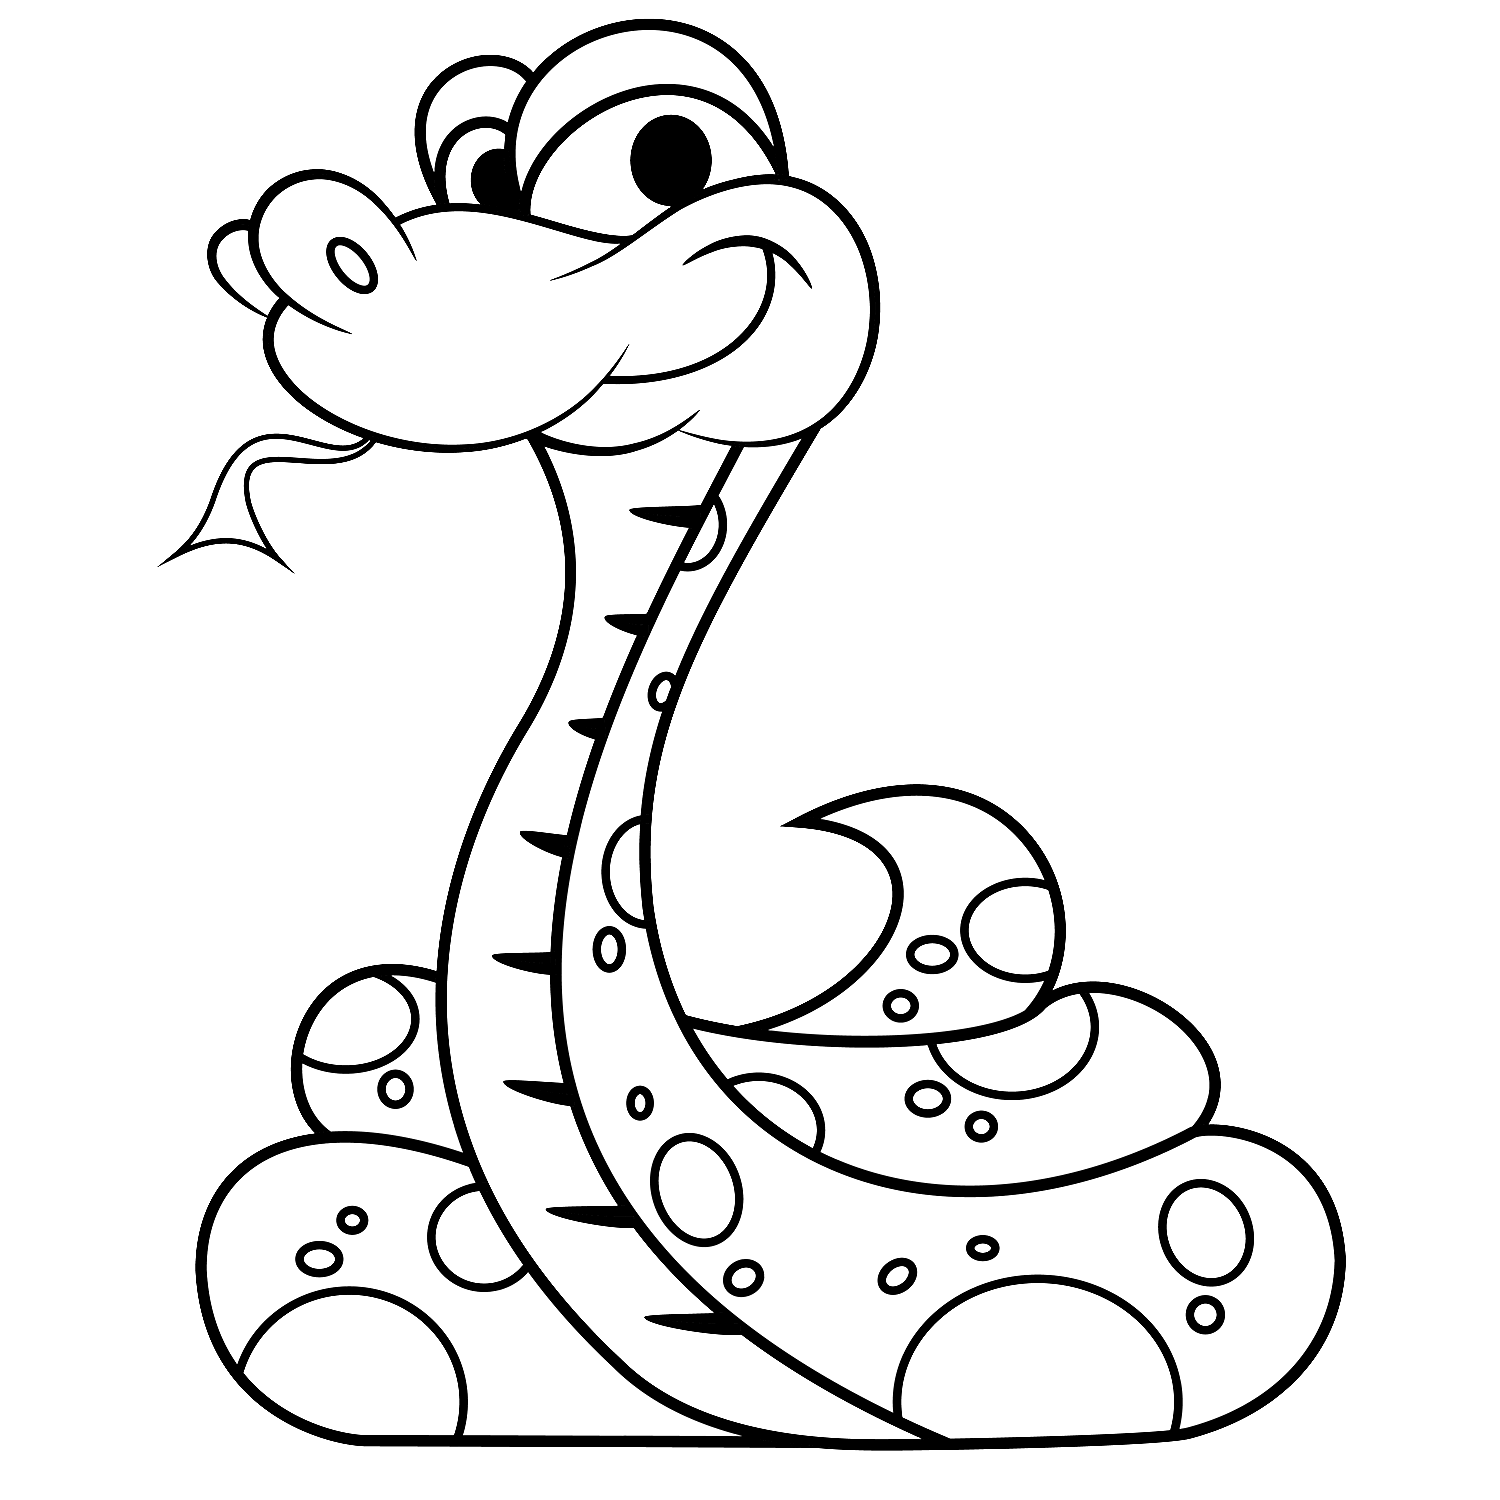 Snake Coloring Pages (6) | Coloring Kids